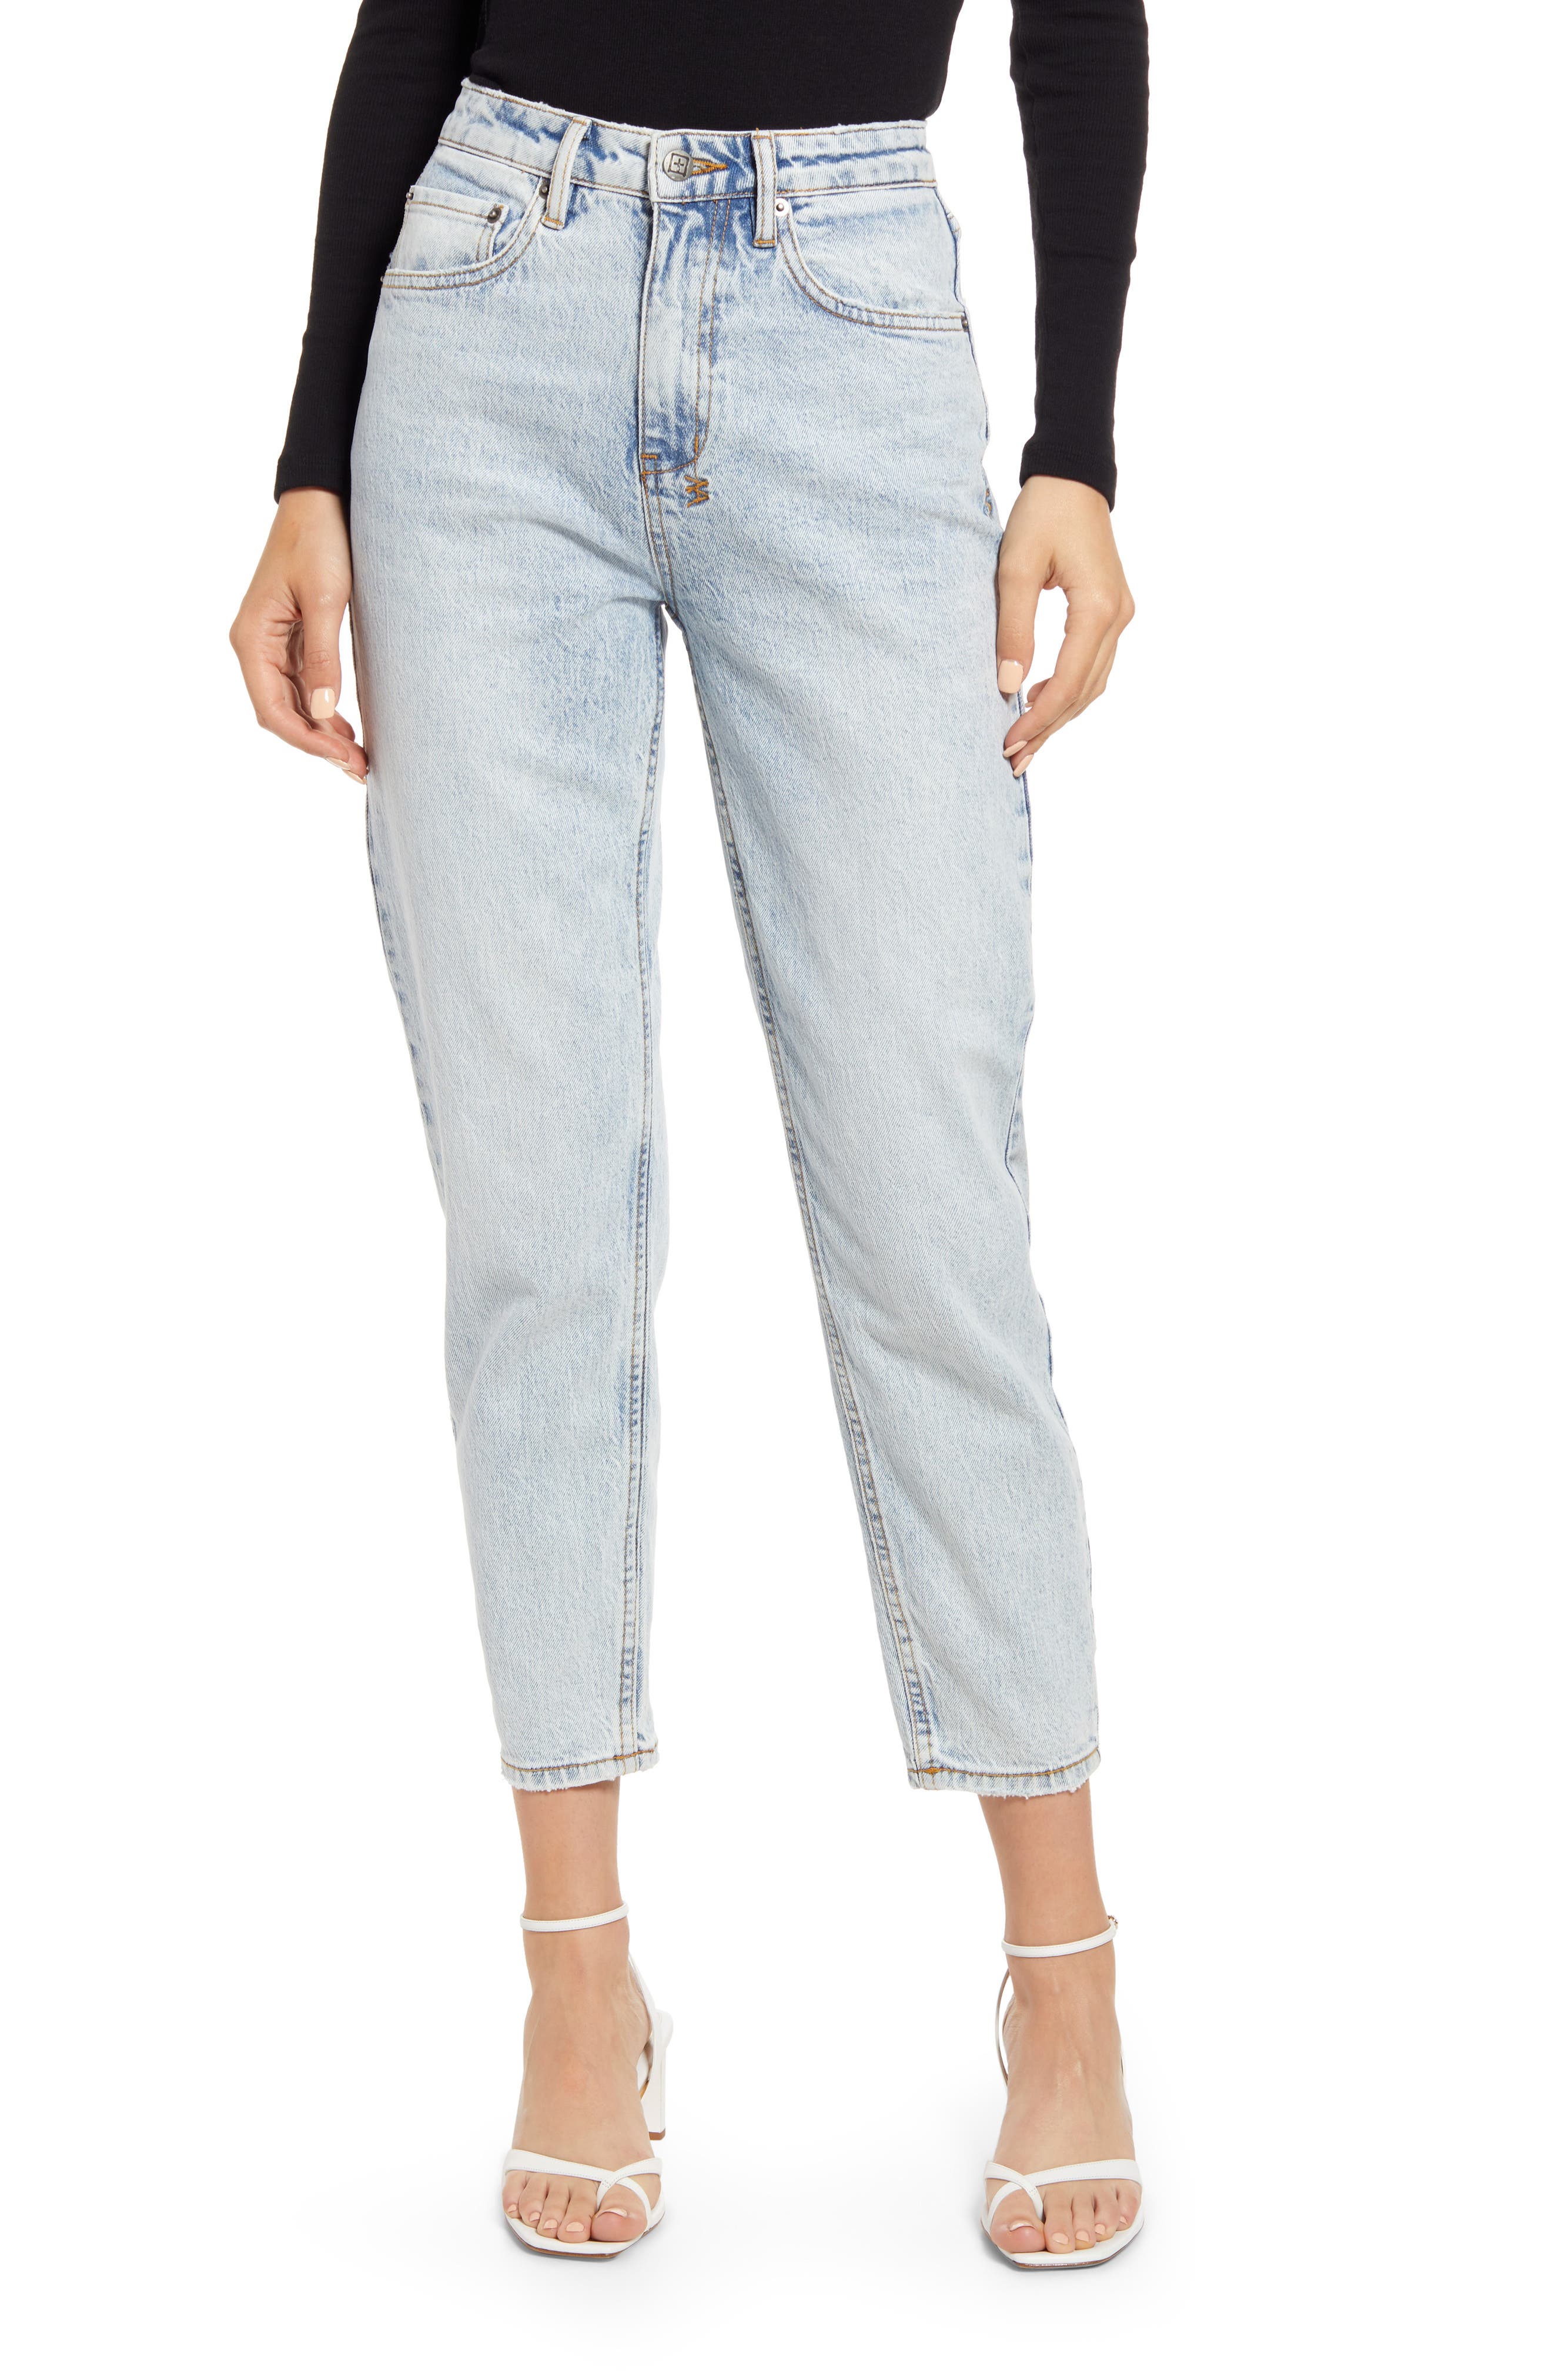 Ksubi Pointer High Waist Relaxed Tapered Jeans in Denim at Nordstrom, Size 26